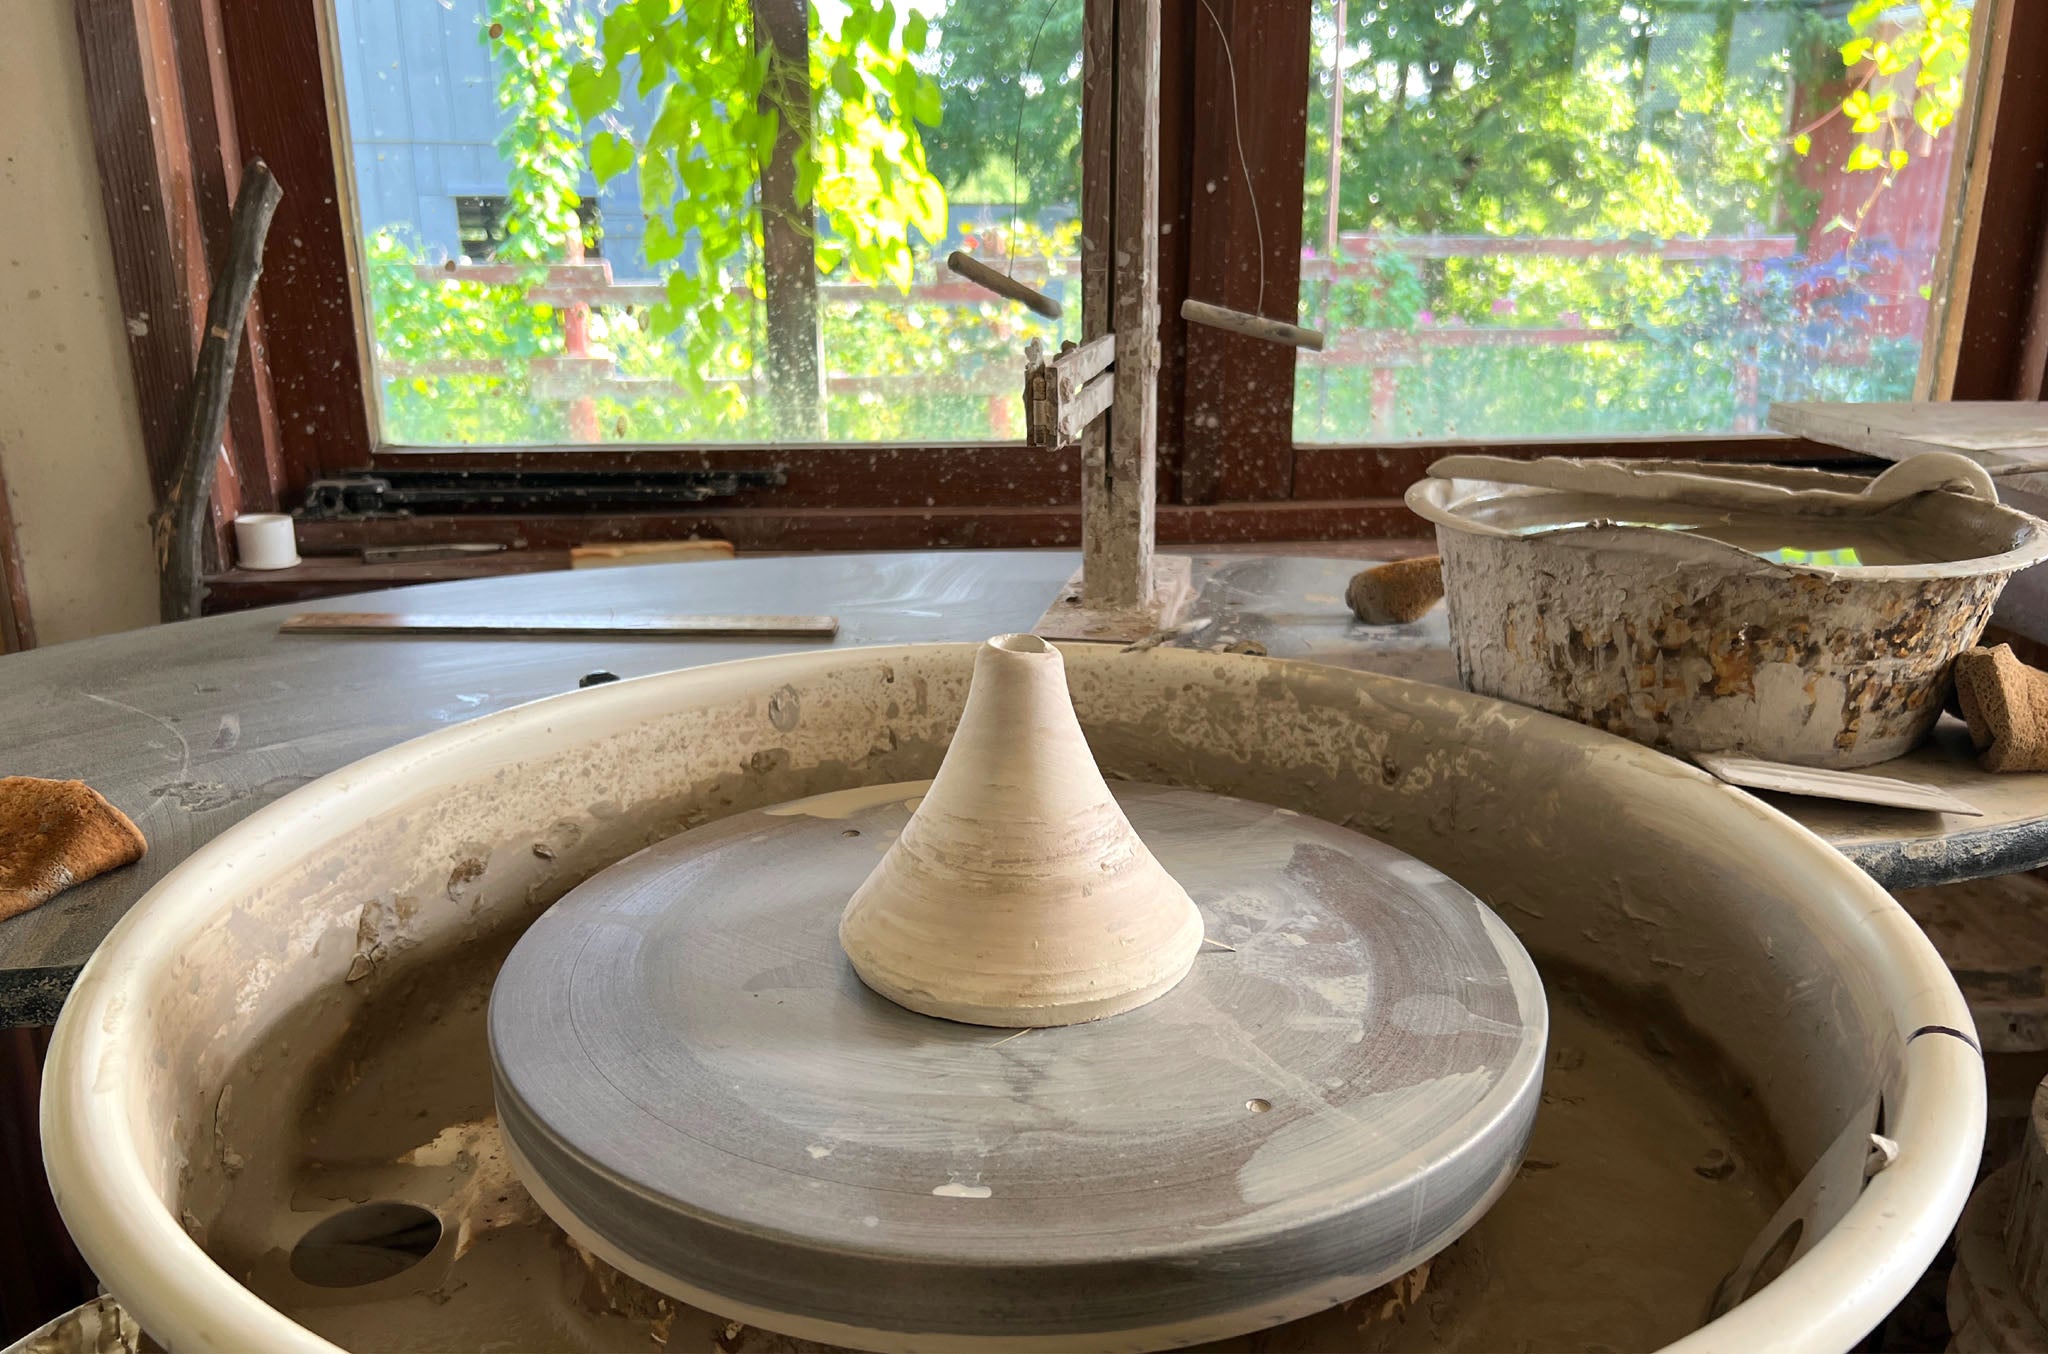 Studio of John Thomas of Dunn County Pottery in Downsville WI